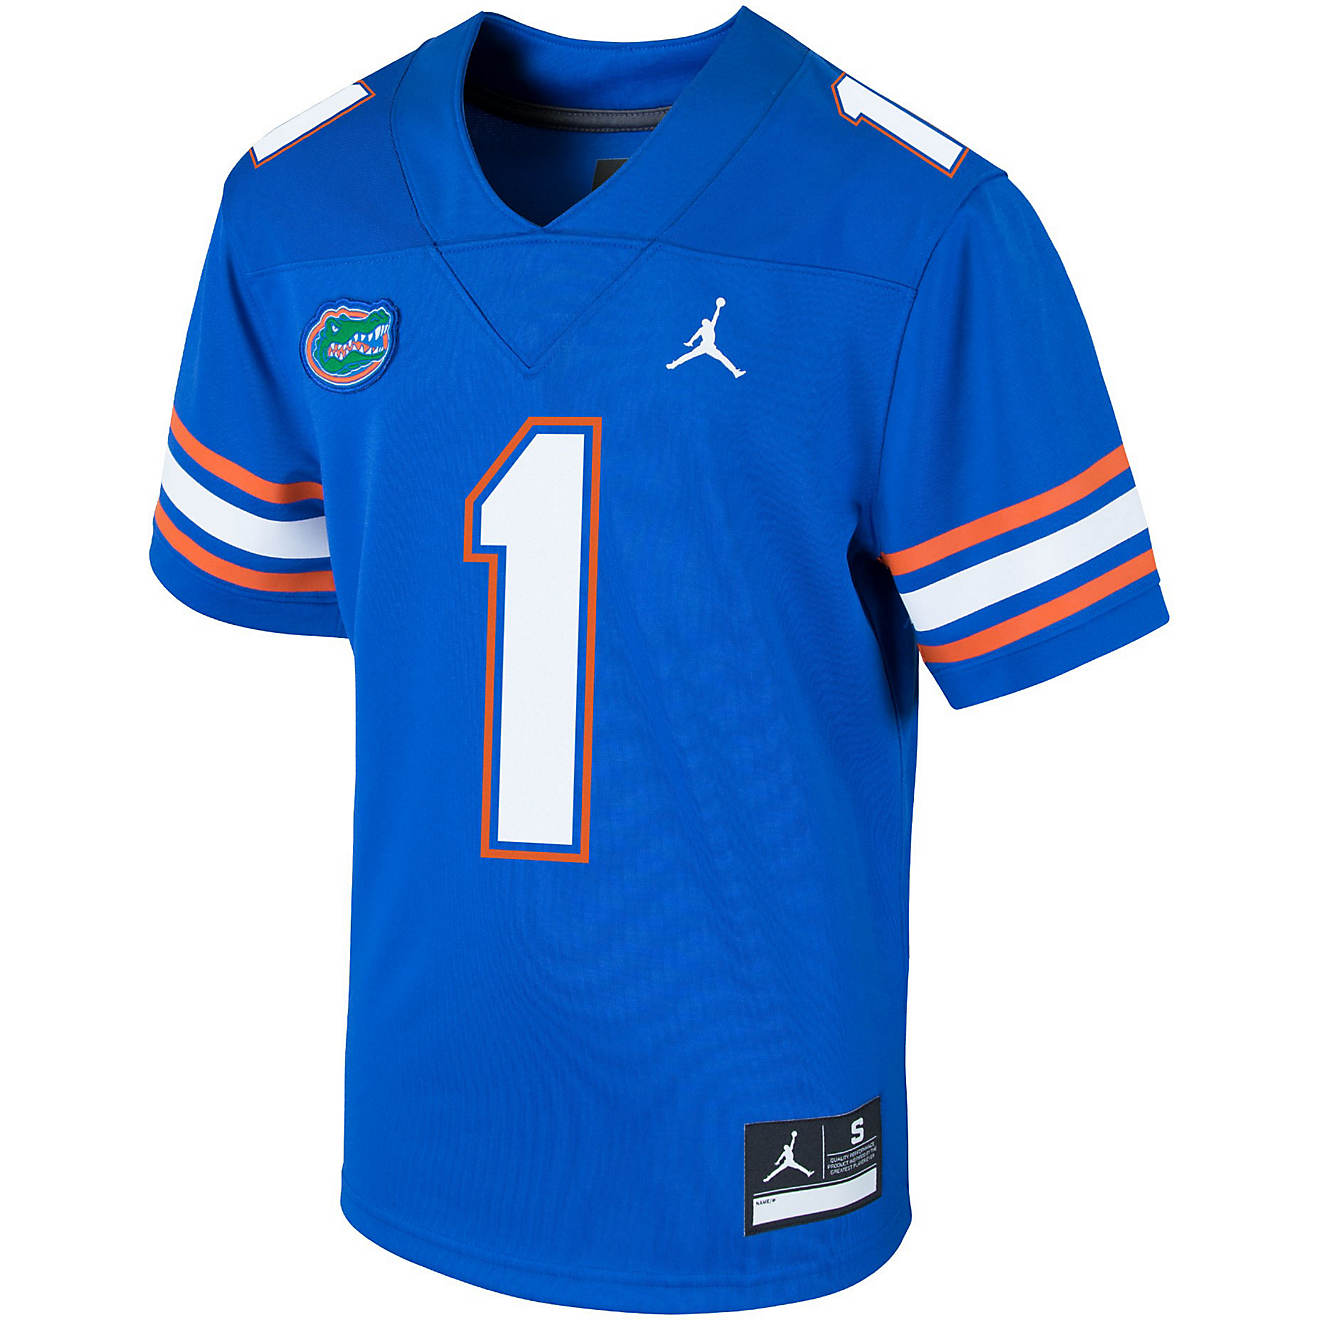 Nike Boys' University of Florida Untouchable Replica Football Jersey                                                             - view number 1